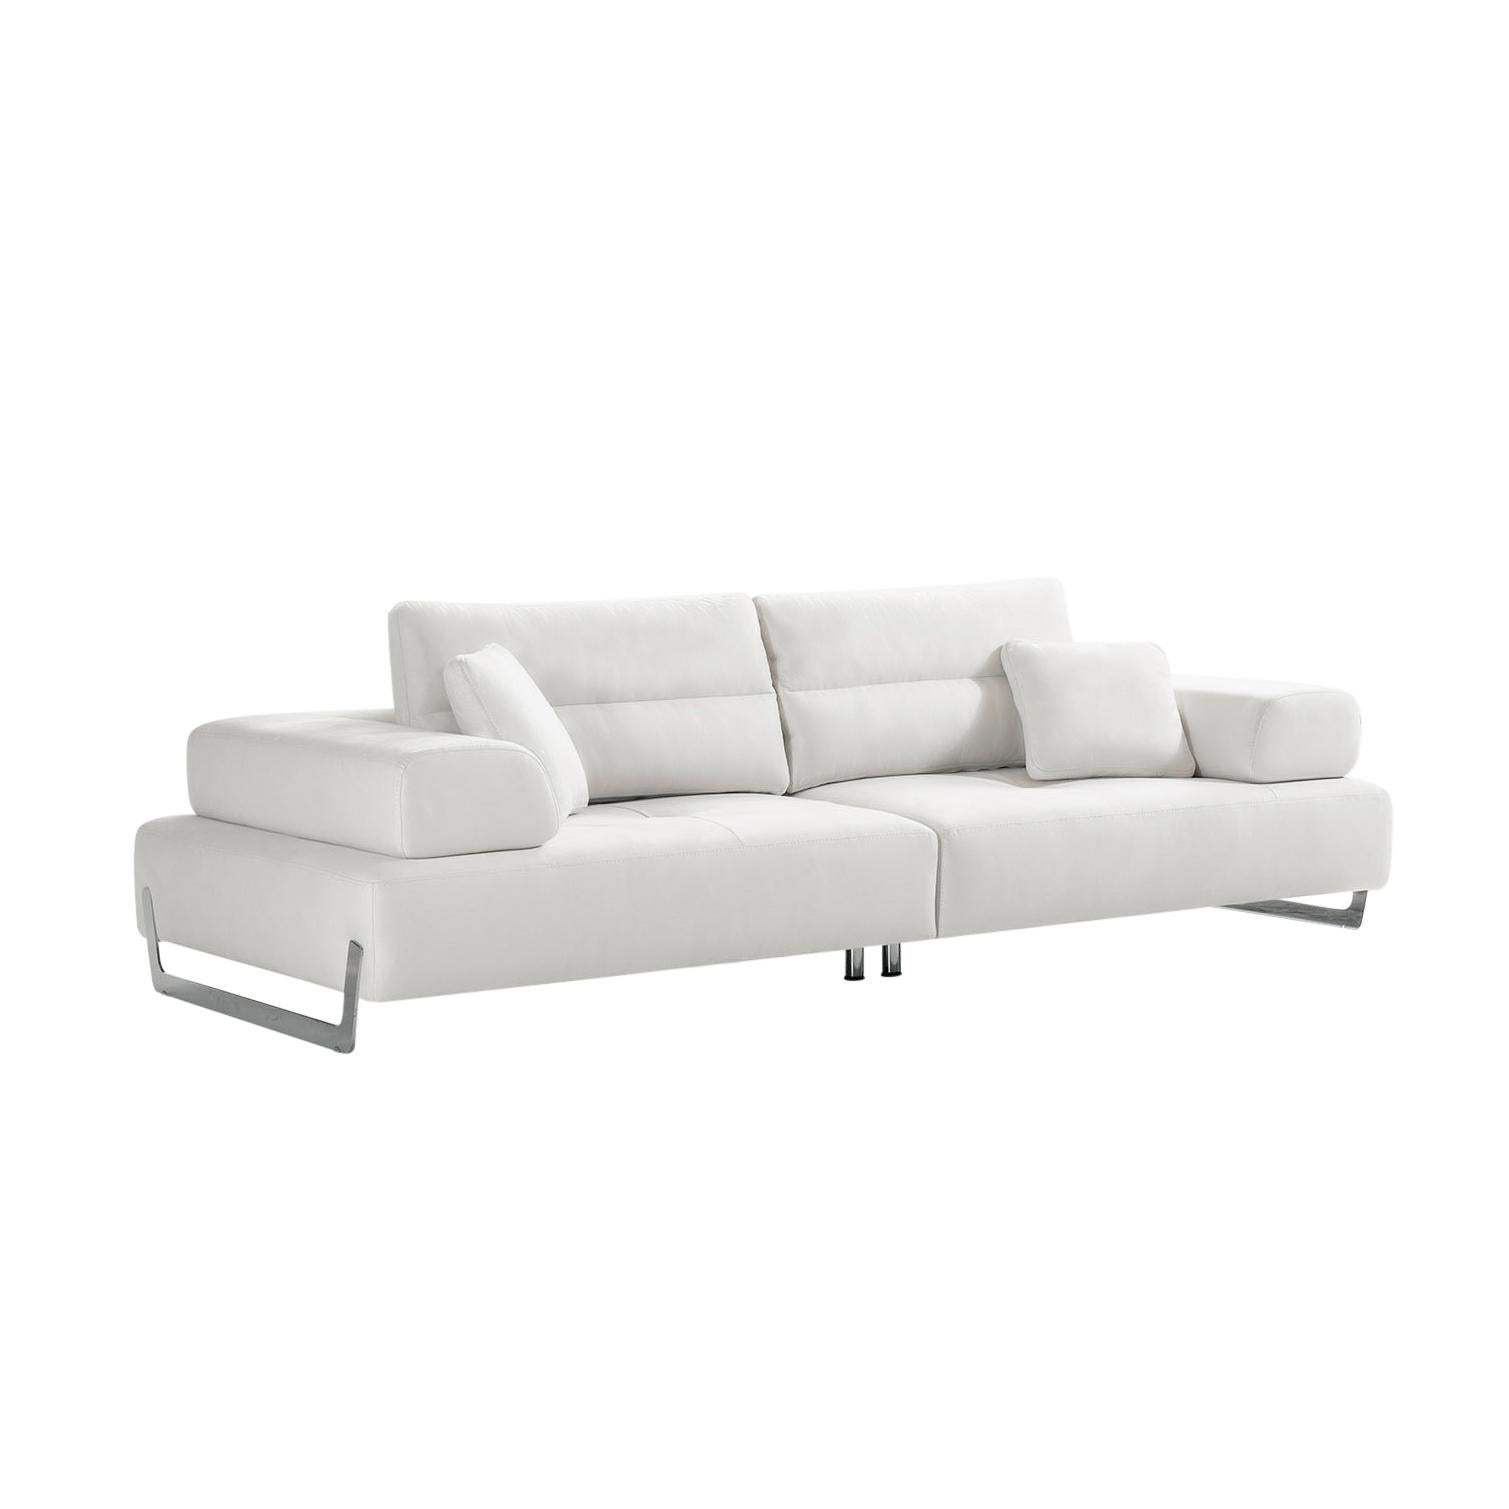 Pasargad Home Ravenna Sofa with Sliding Back & Armrests In New Condition For Sale In Port Washington, NY